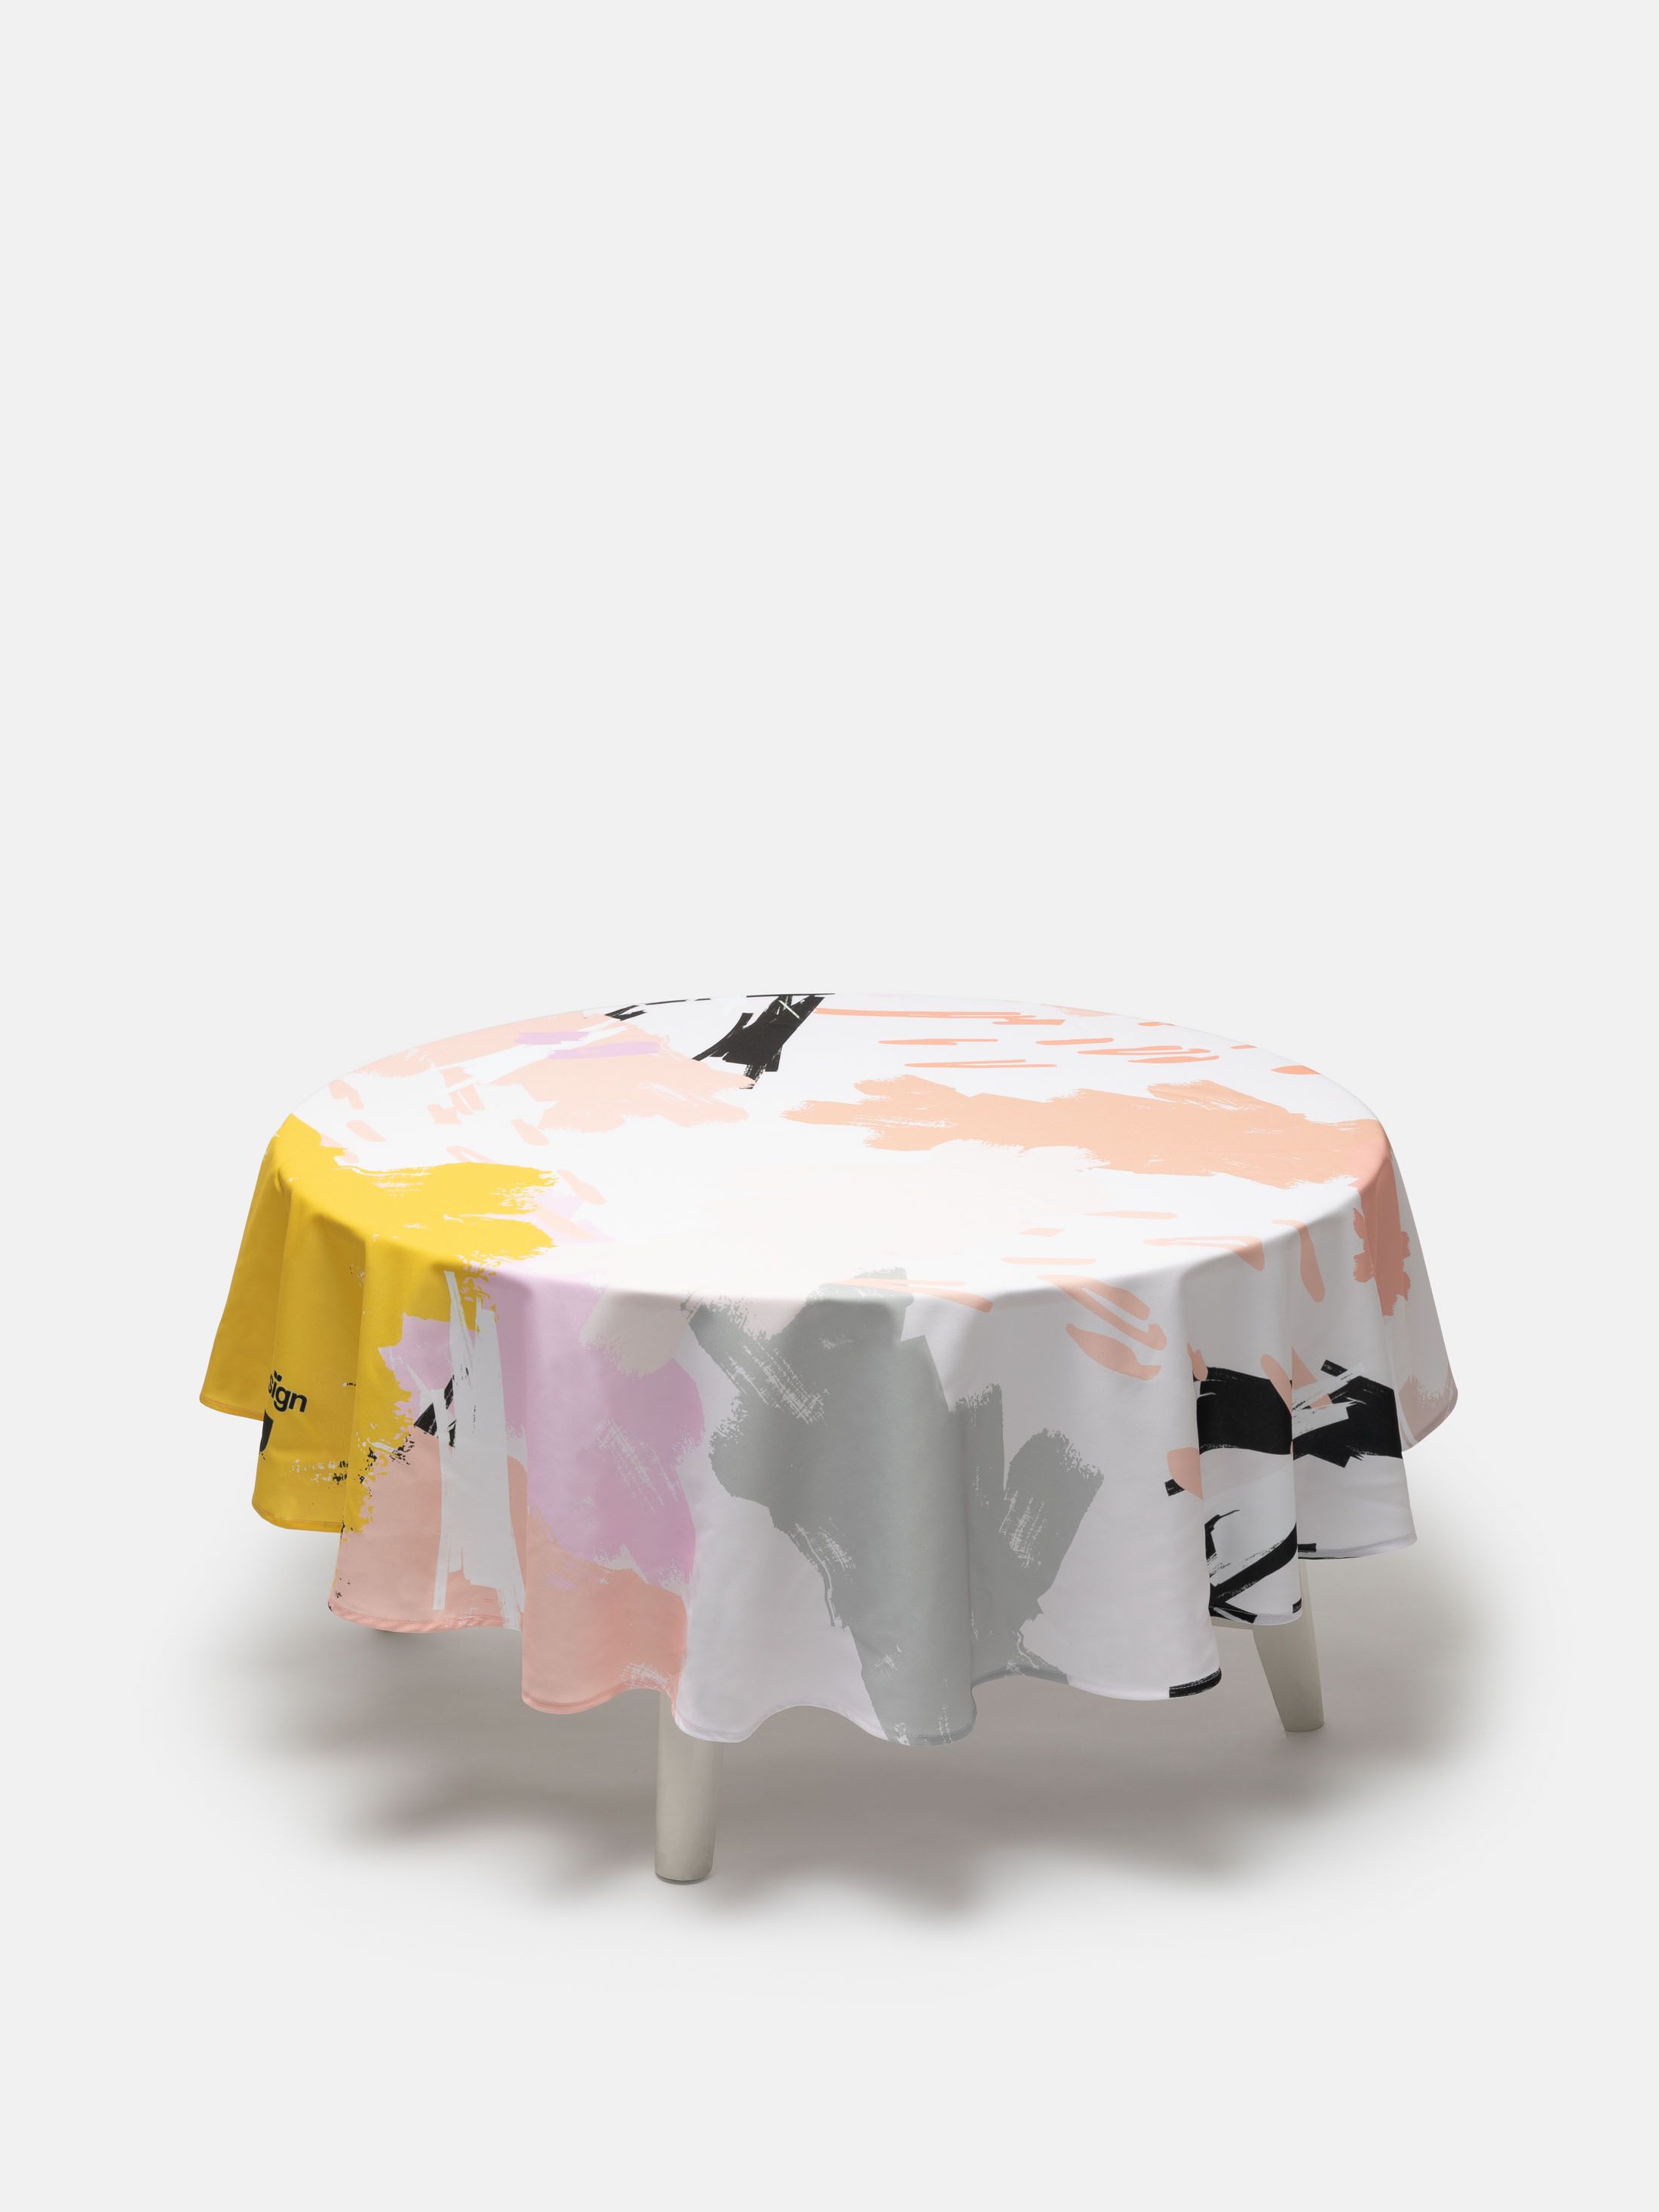 design your own table cloth